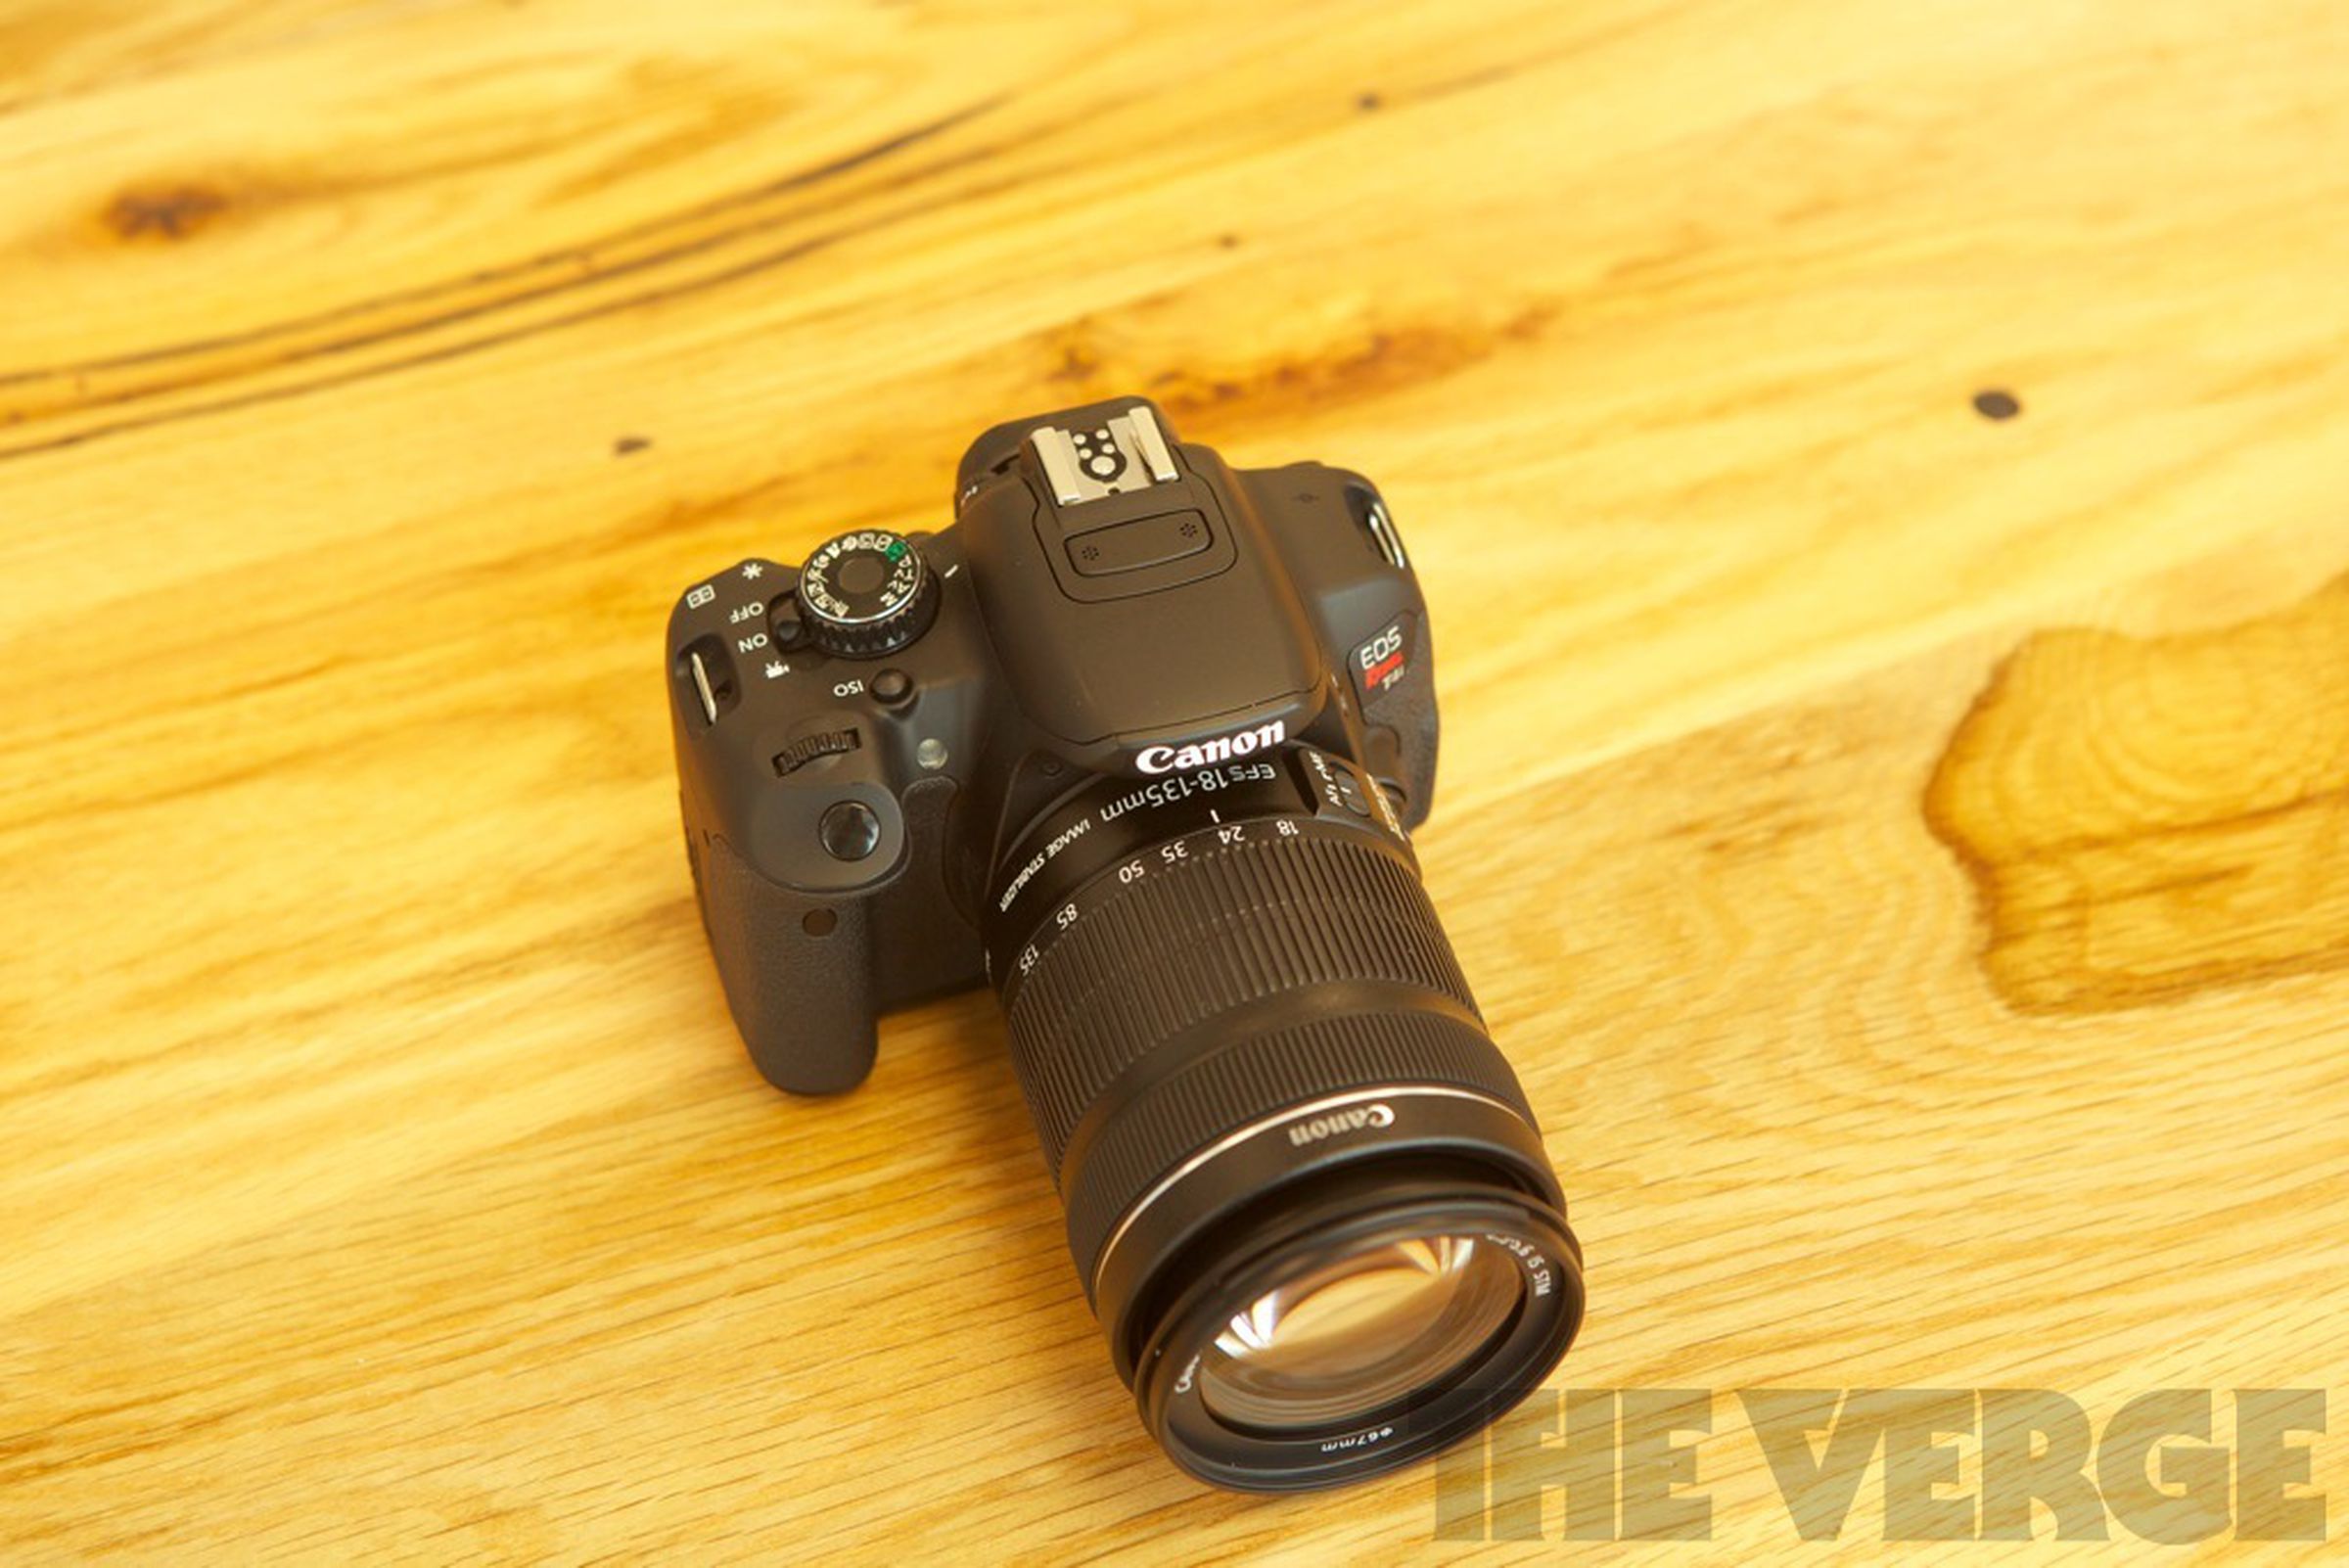 Canon Rebel T4i hands-on pictures